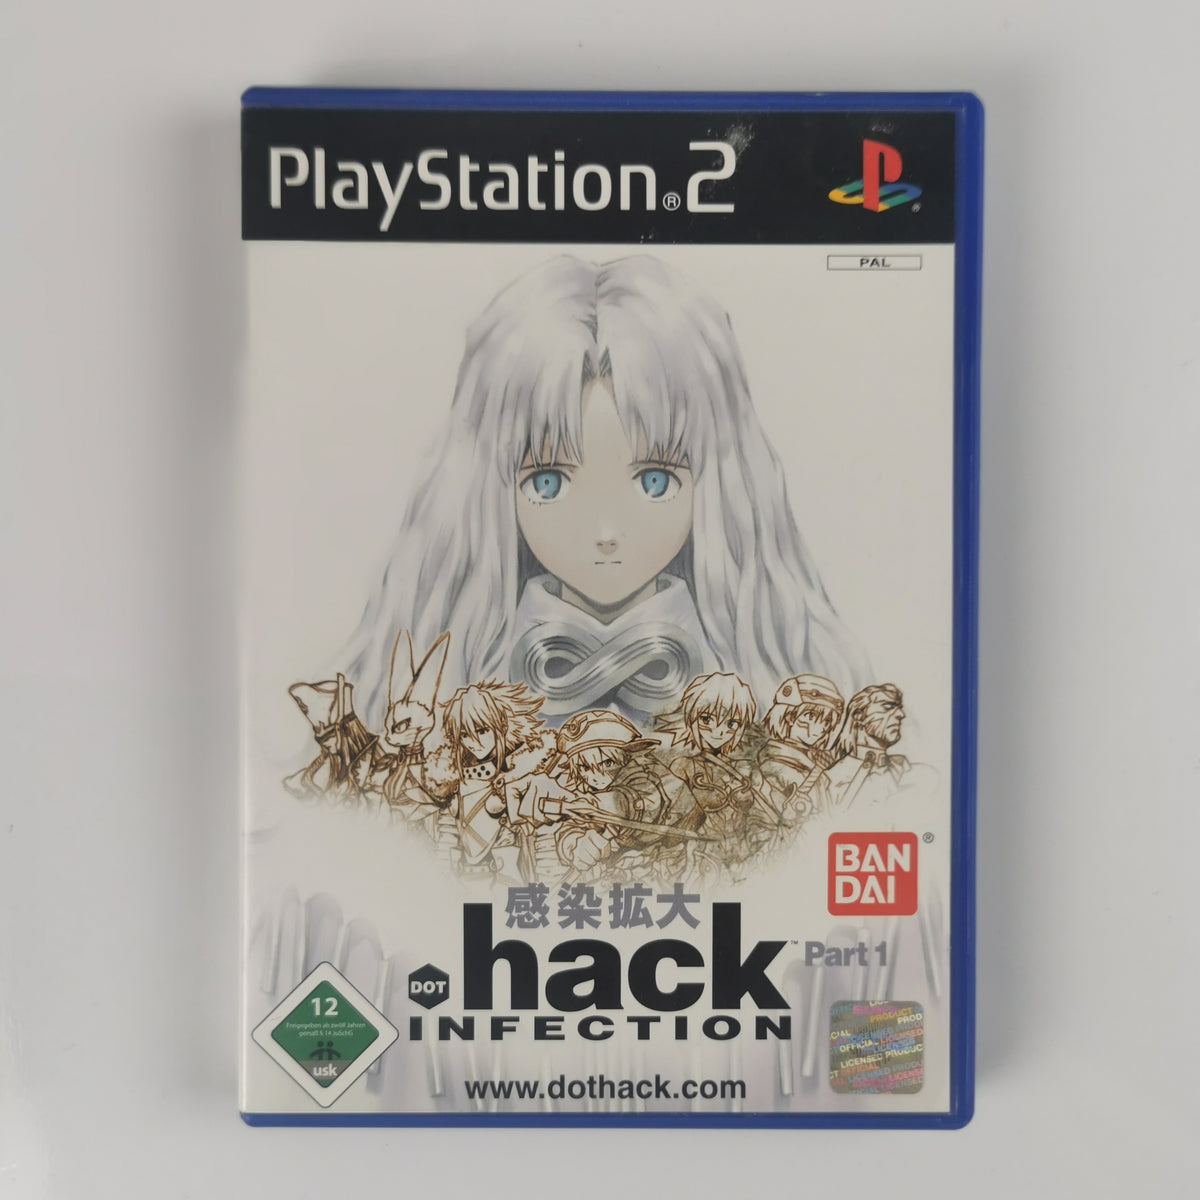 .hack Part 1: Infection Playstation 2